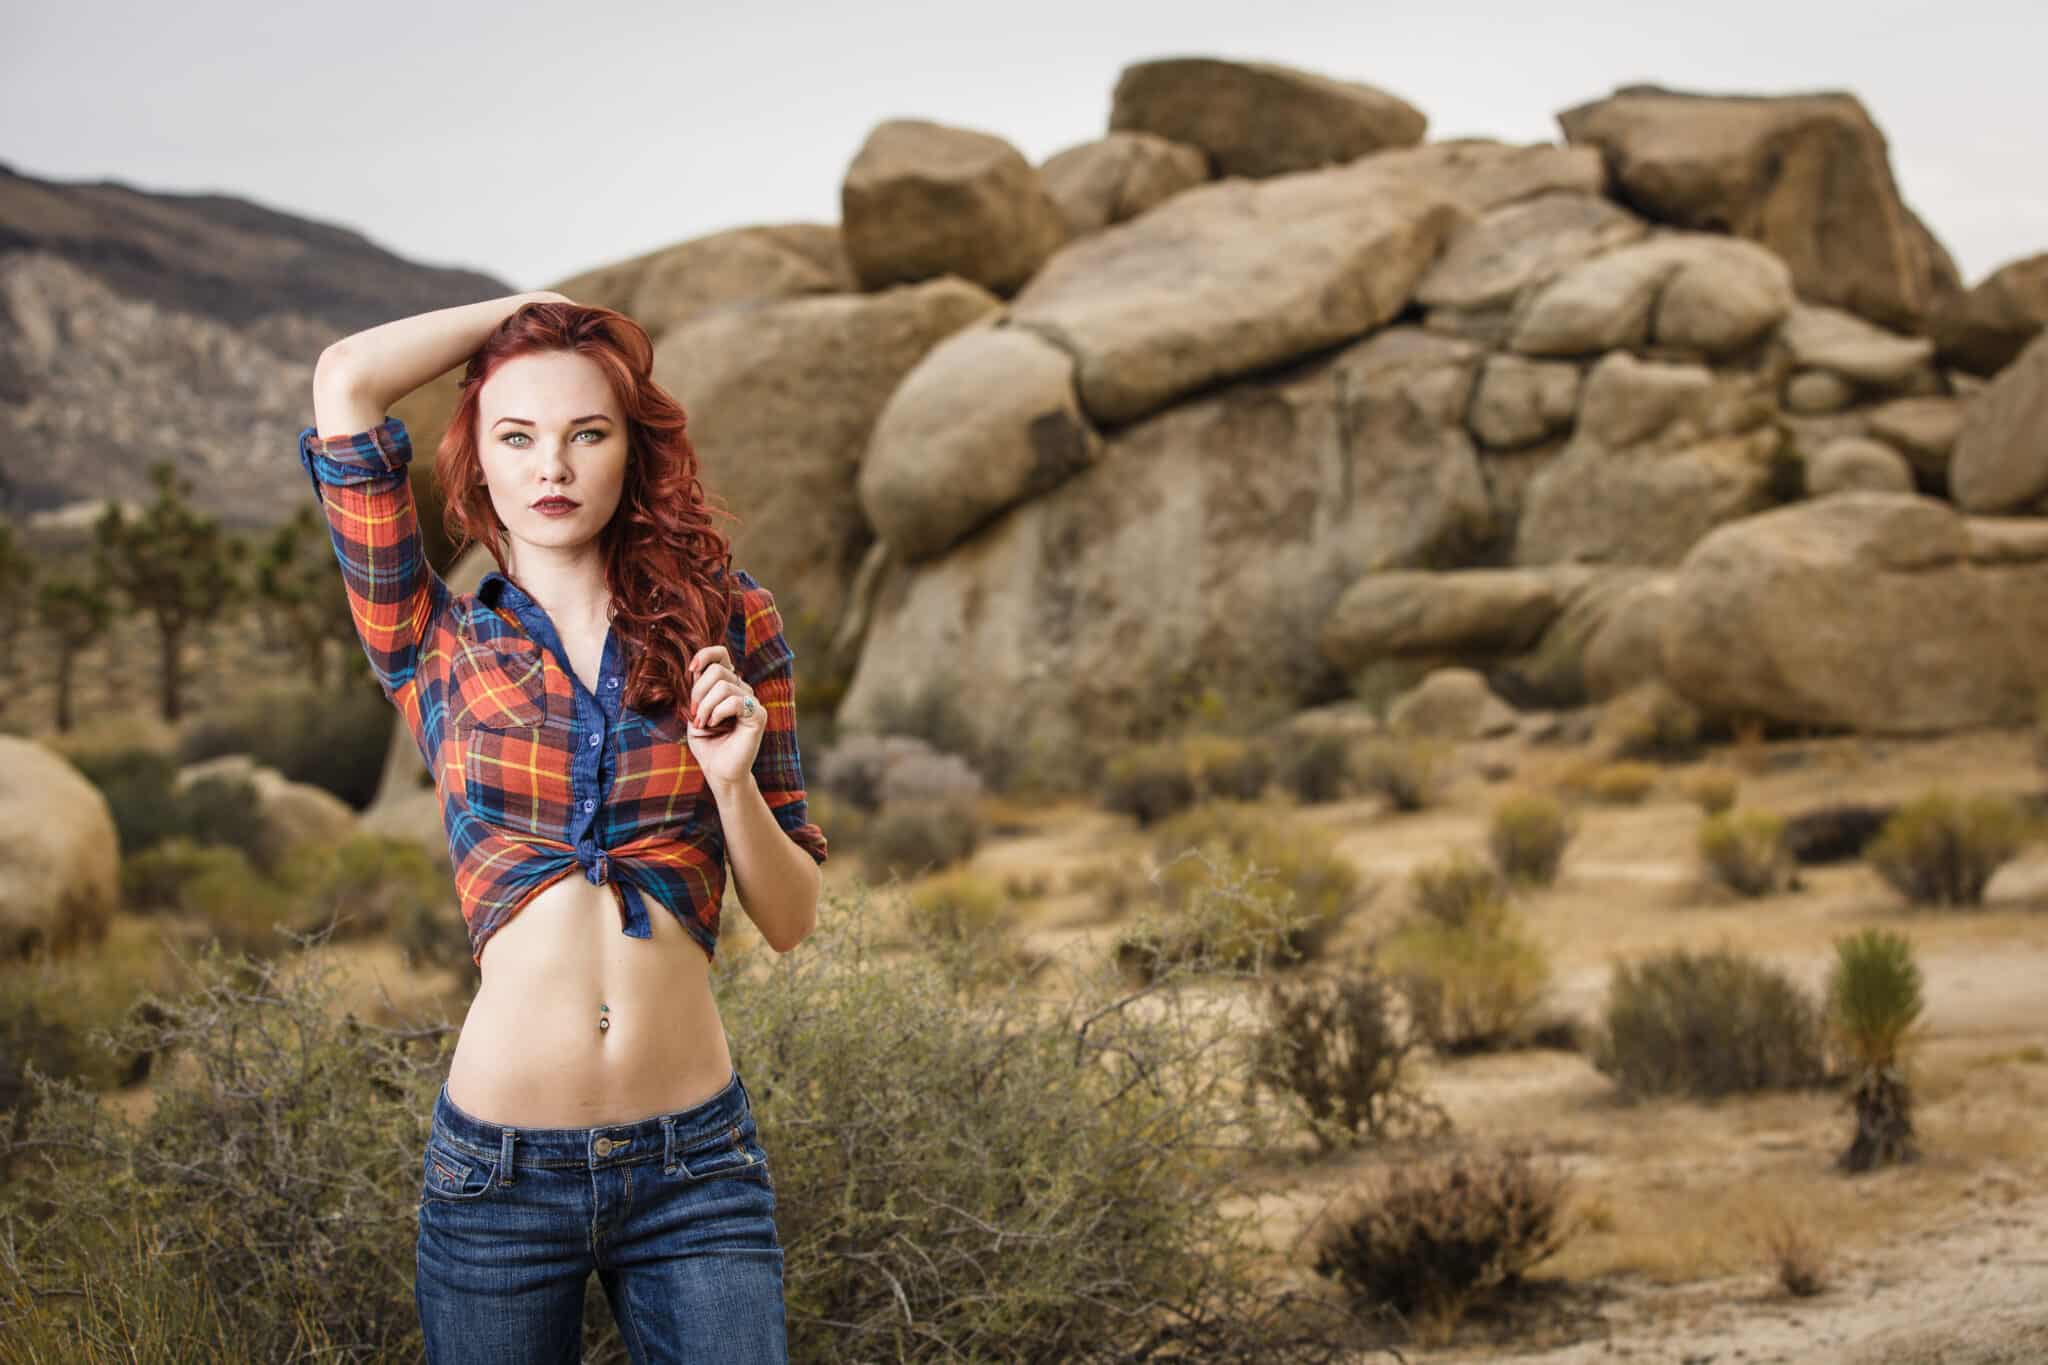 Young model wearing red plaid shirt and low-rise jeans posing at Joshua Tree National Park